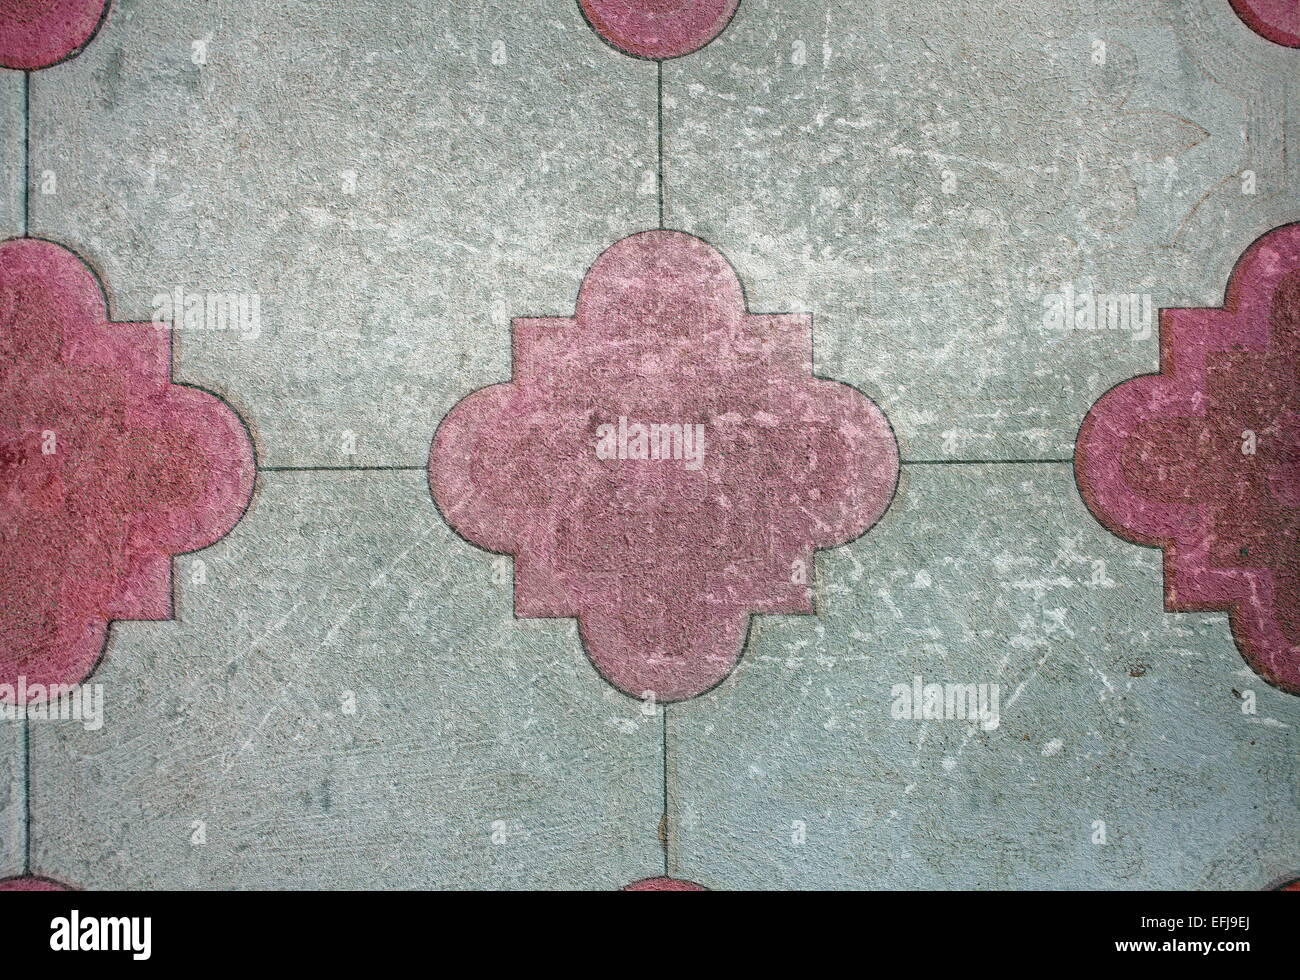 abstract  cement tiles for outdoor paving resulting in grungy surface Stock Photo